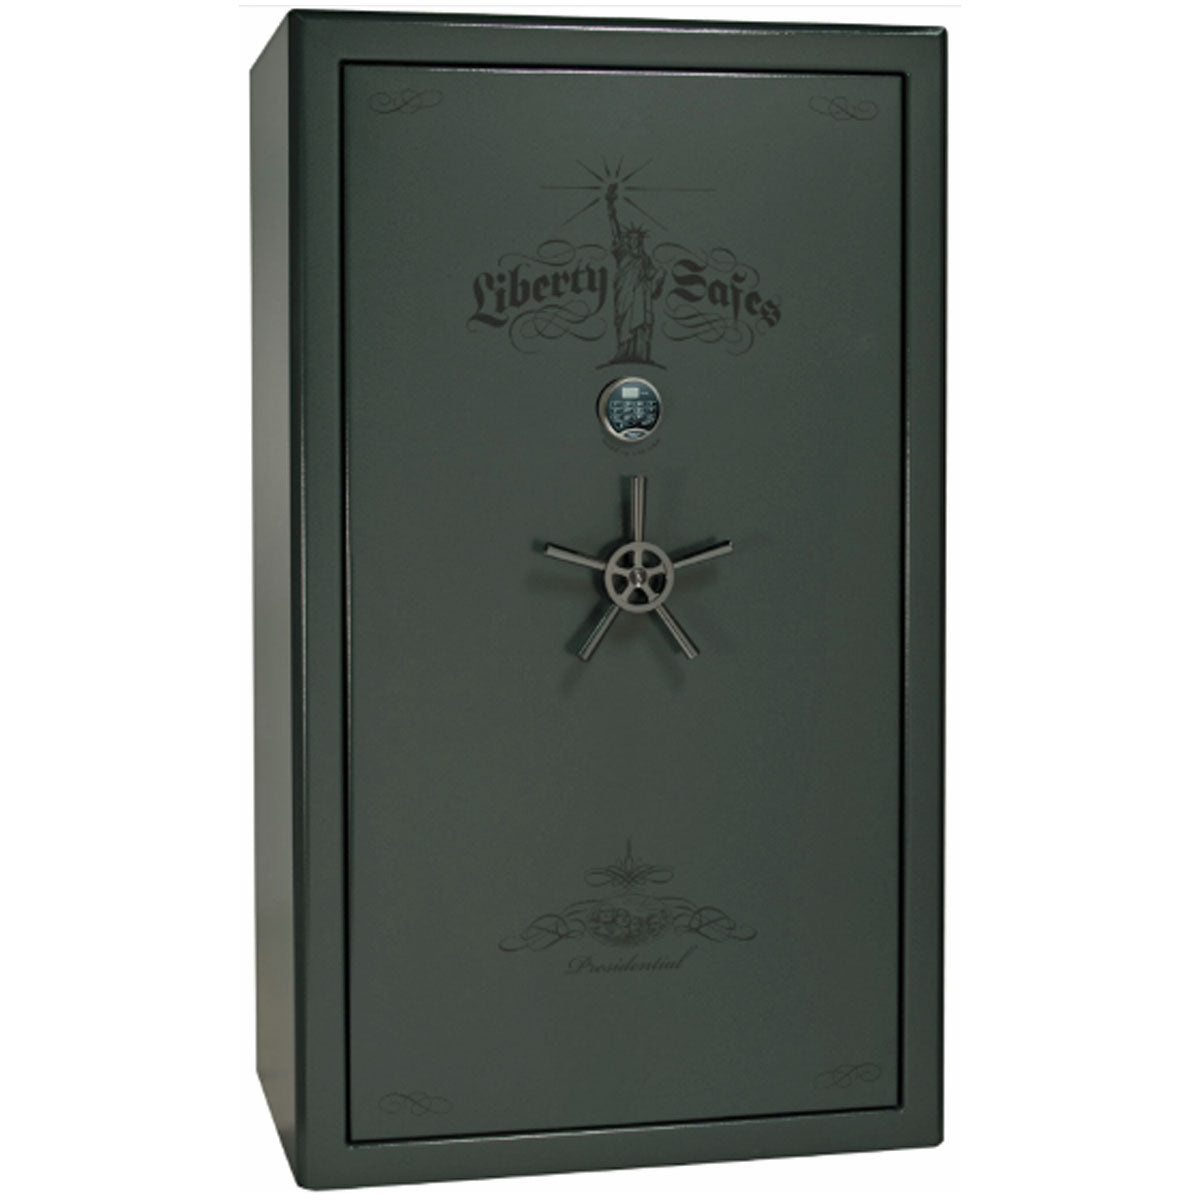 Liberty Safe Presidential 50 in Green Marble with Black Chrome Electronic Lock, closed door.